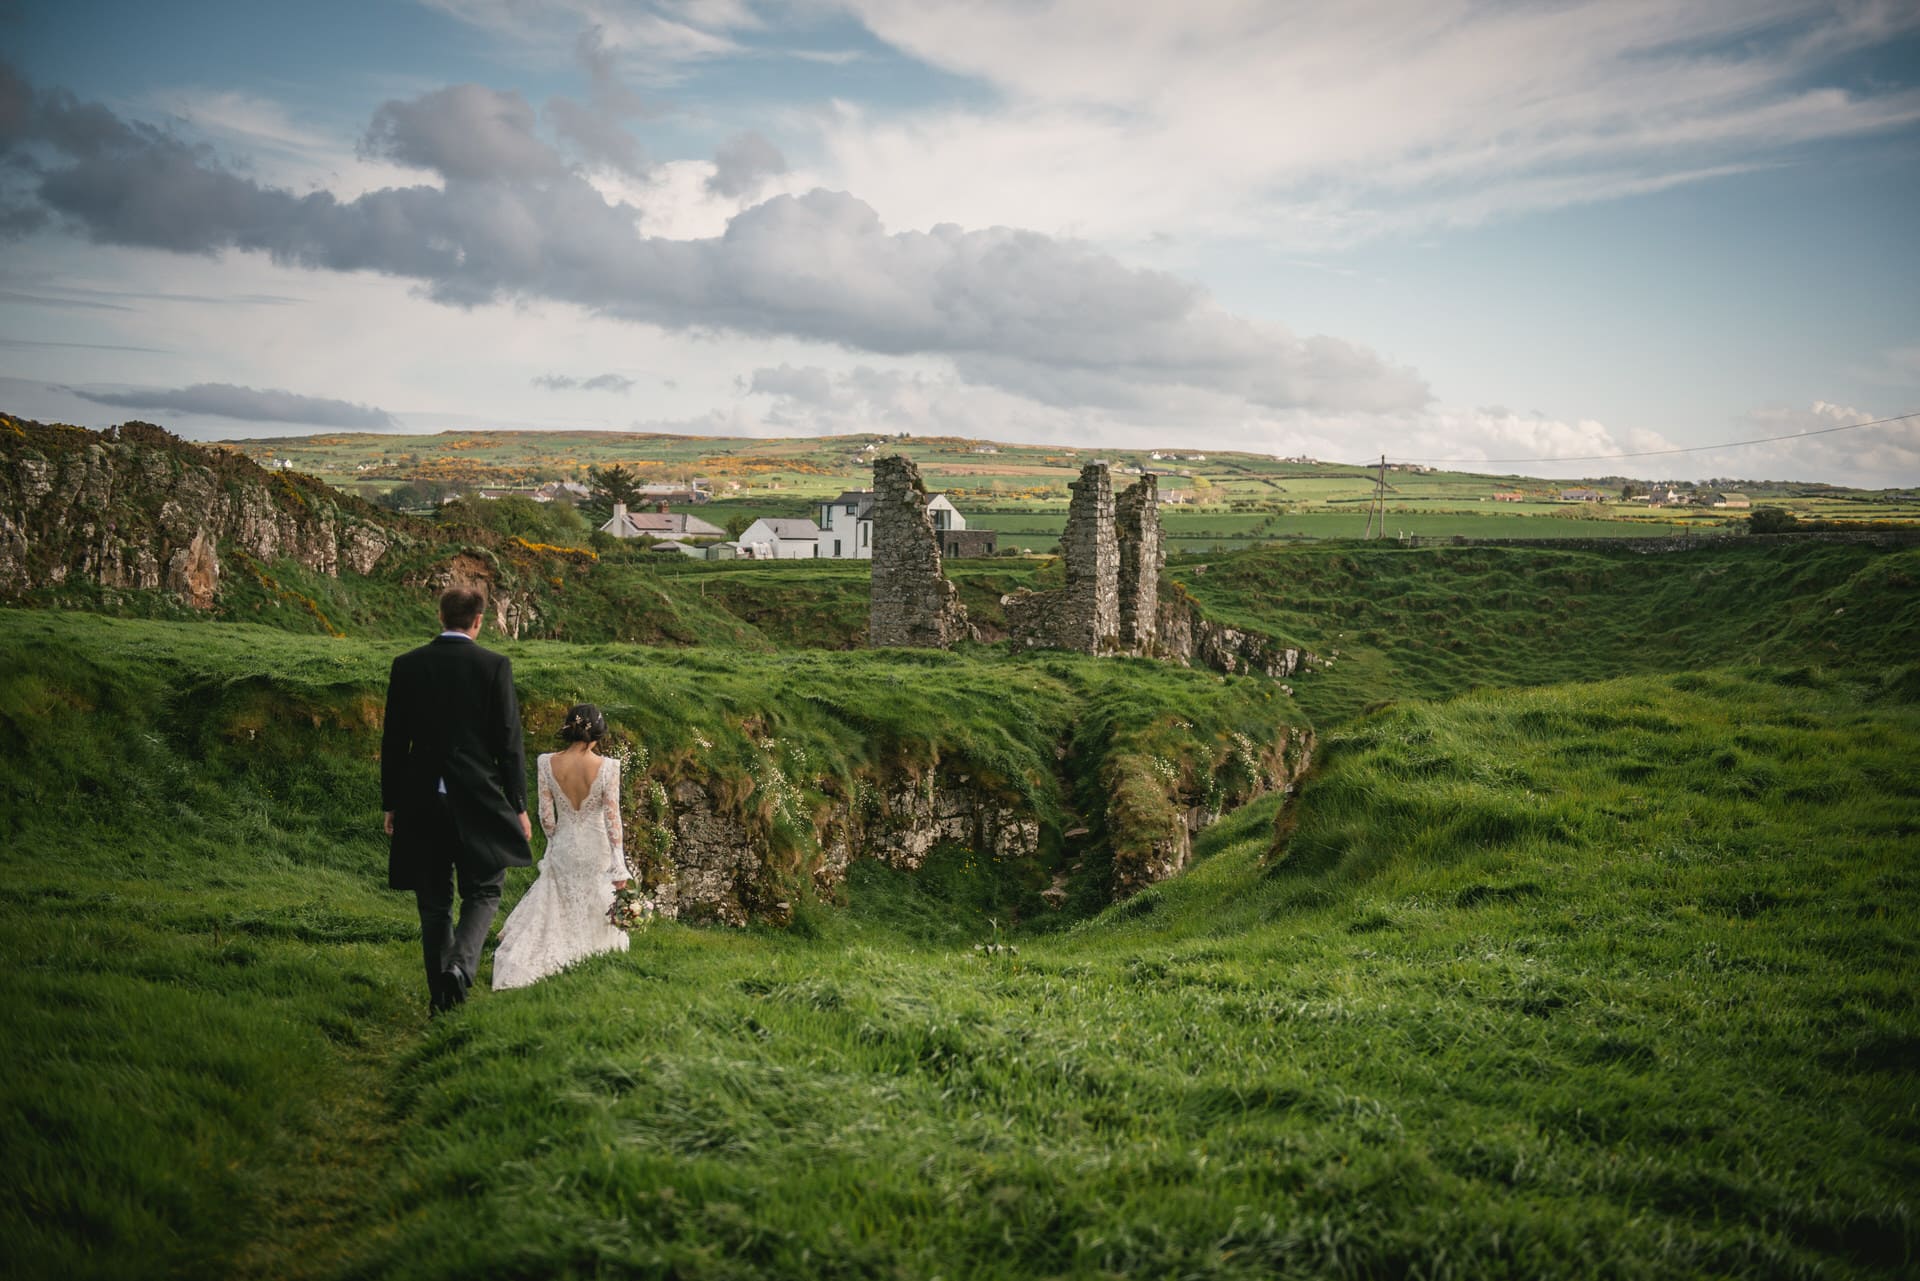 The bride's breathtaking lace train flowing behind her as she walks during their Northern Ireland elopement.